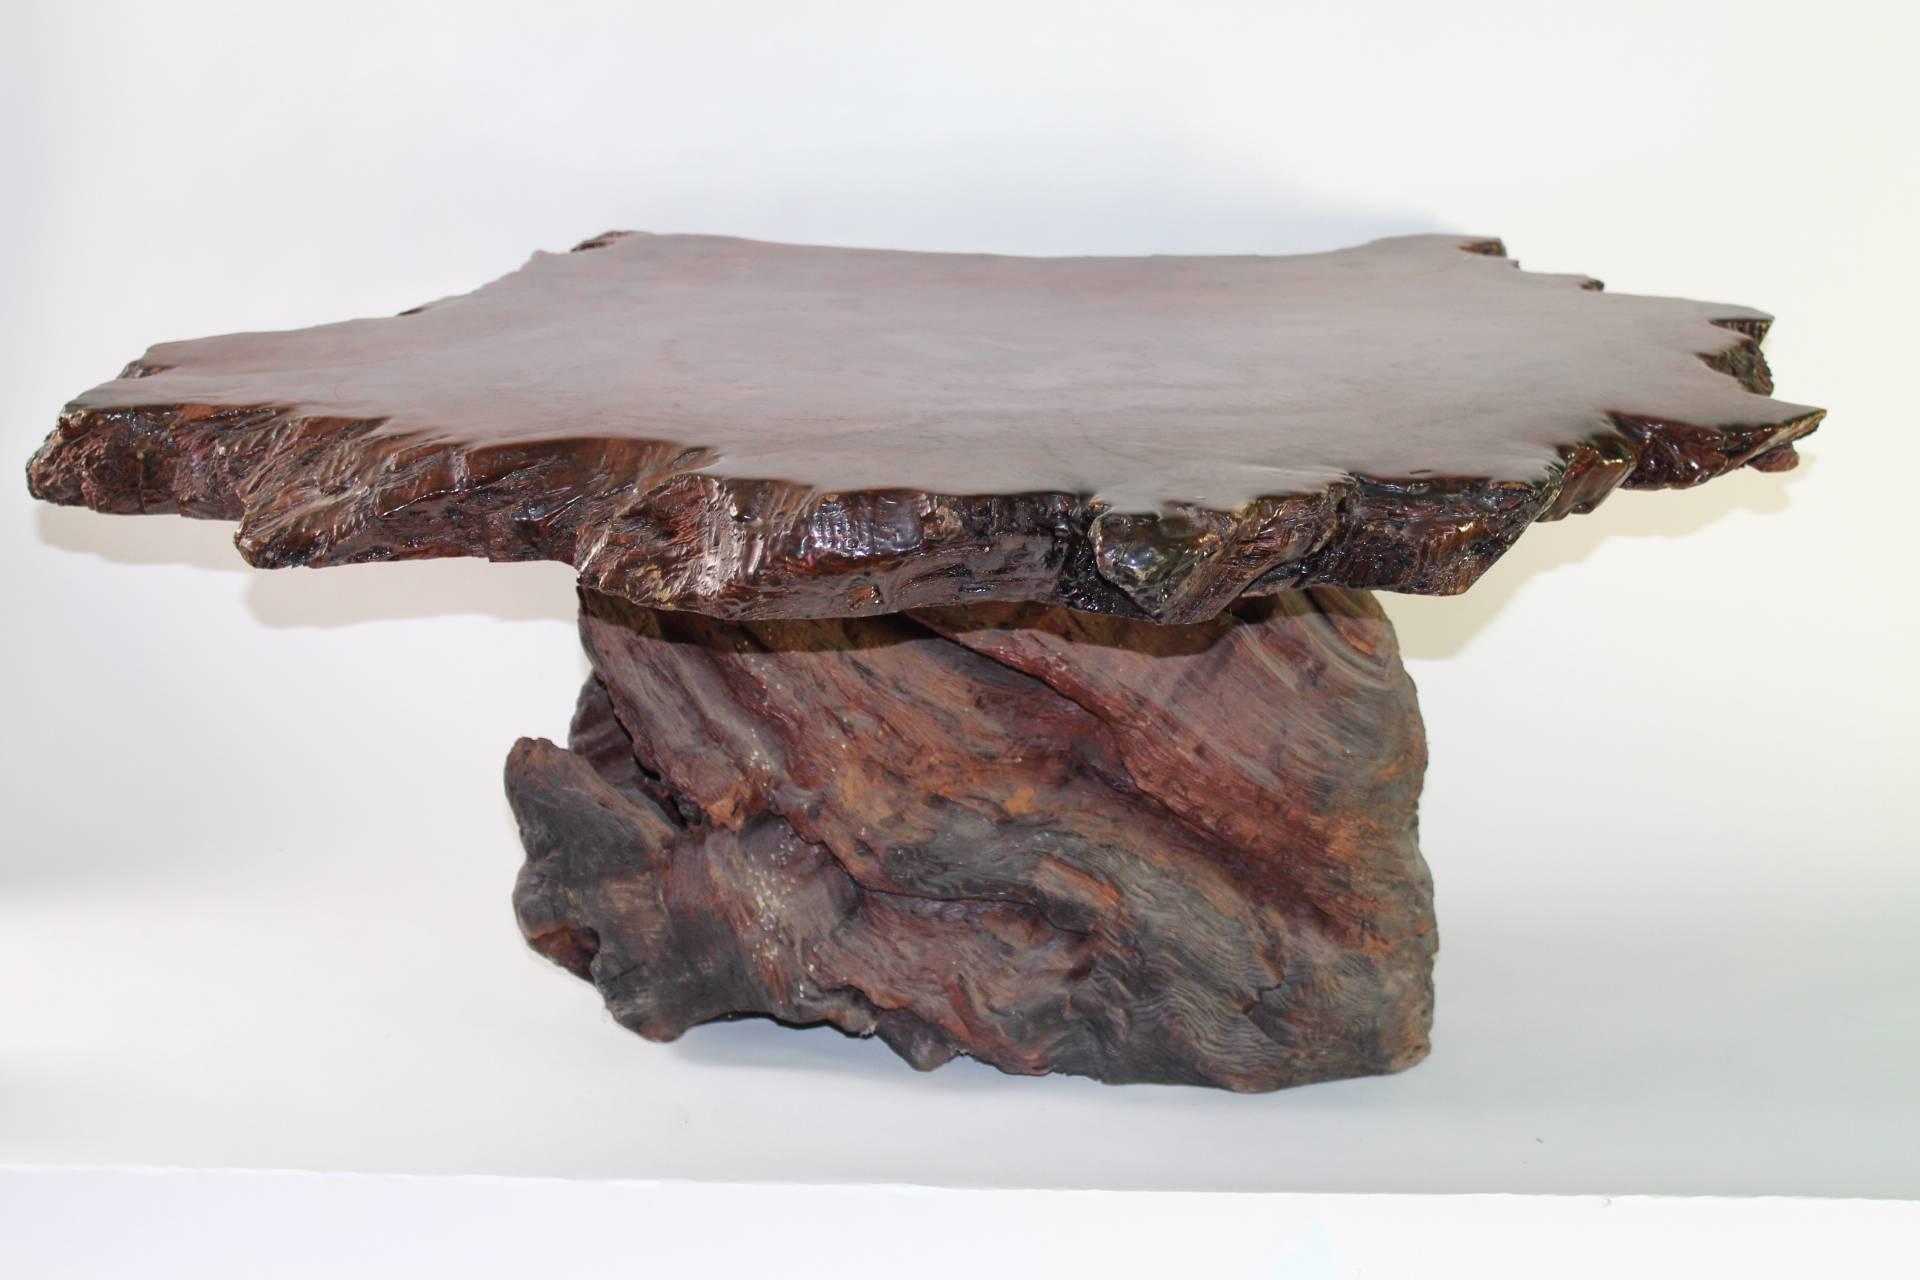 Coffee table in redwood from the 1960s. With raw edges and organic form. Includes a lacquered over top. Wear appropriate to age and use. The piece is in good vintage condition.